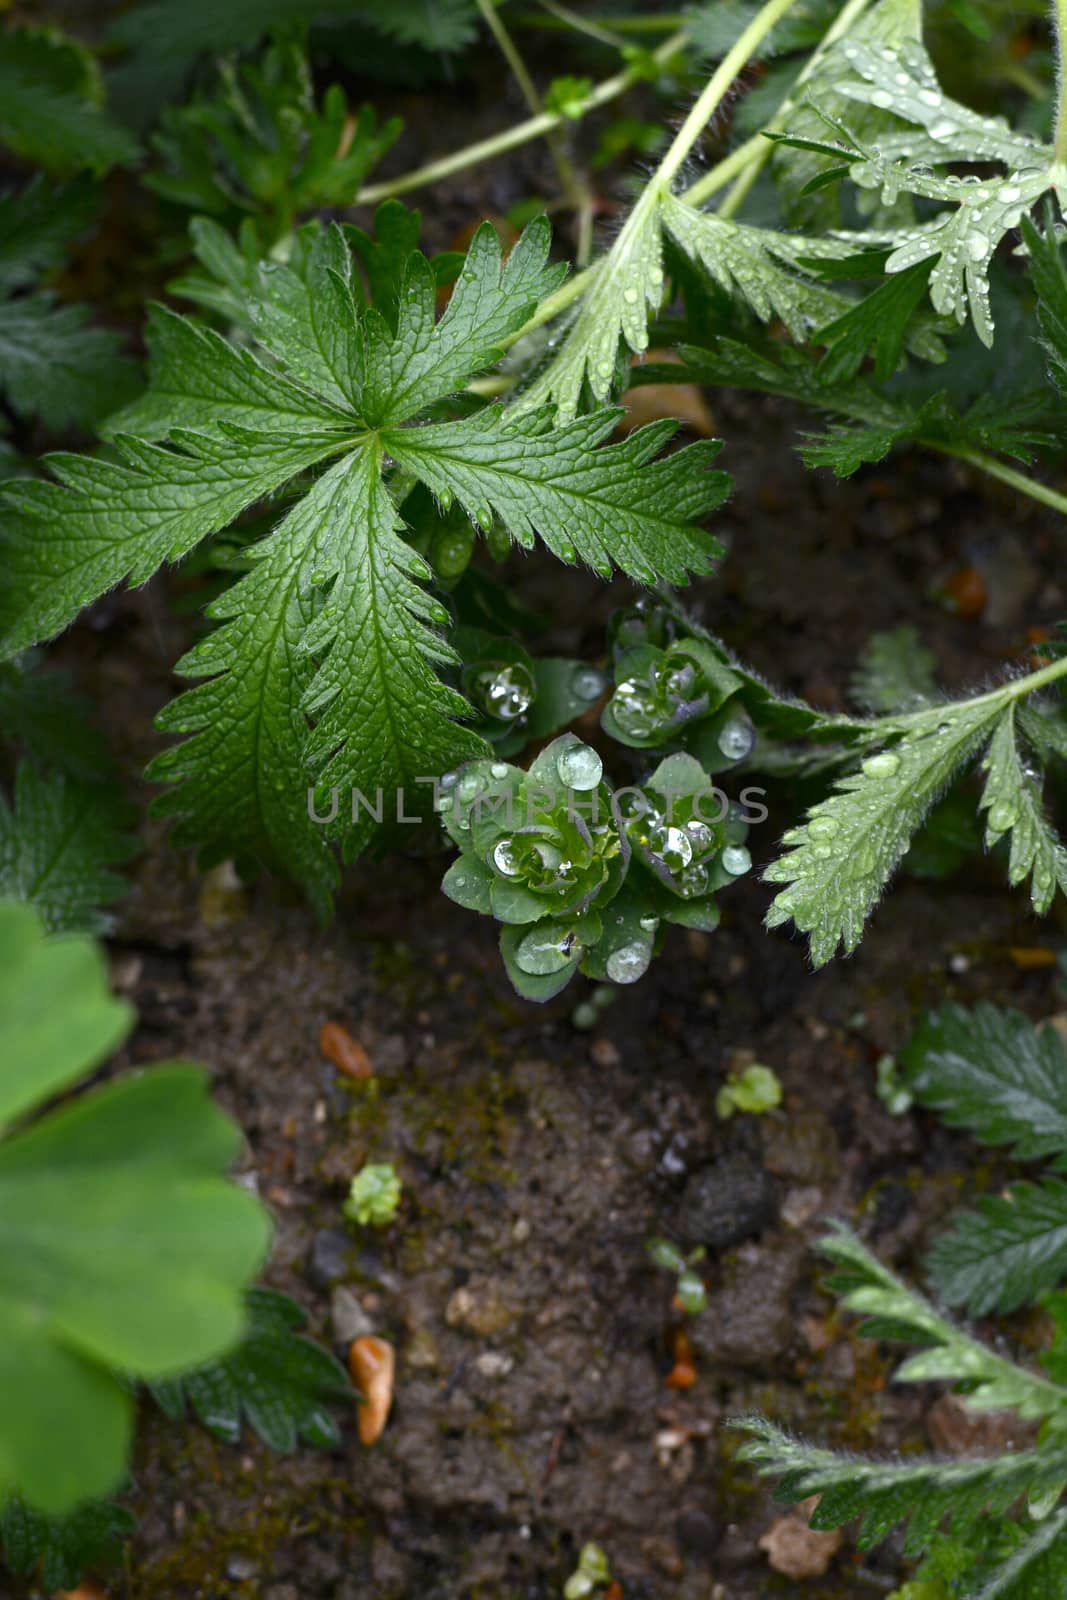 Rain drops gather on foliage of sedum, surrounded by wet green potentilla leaves